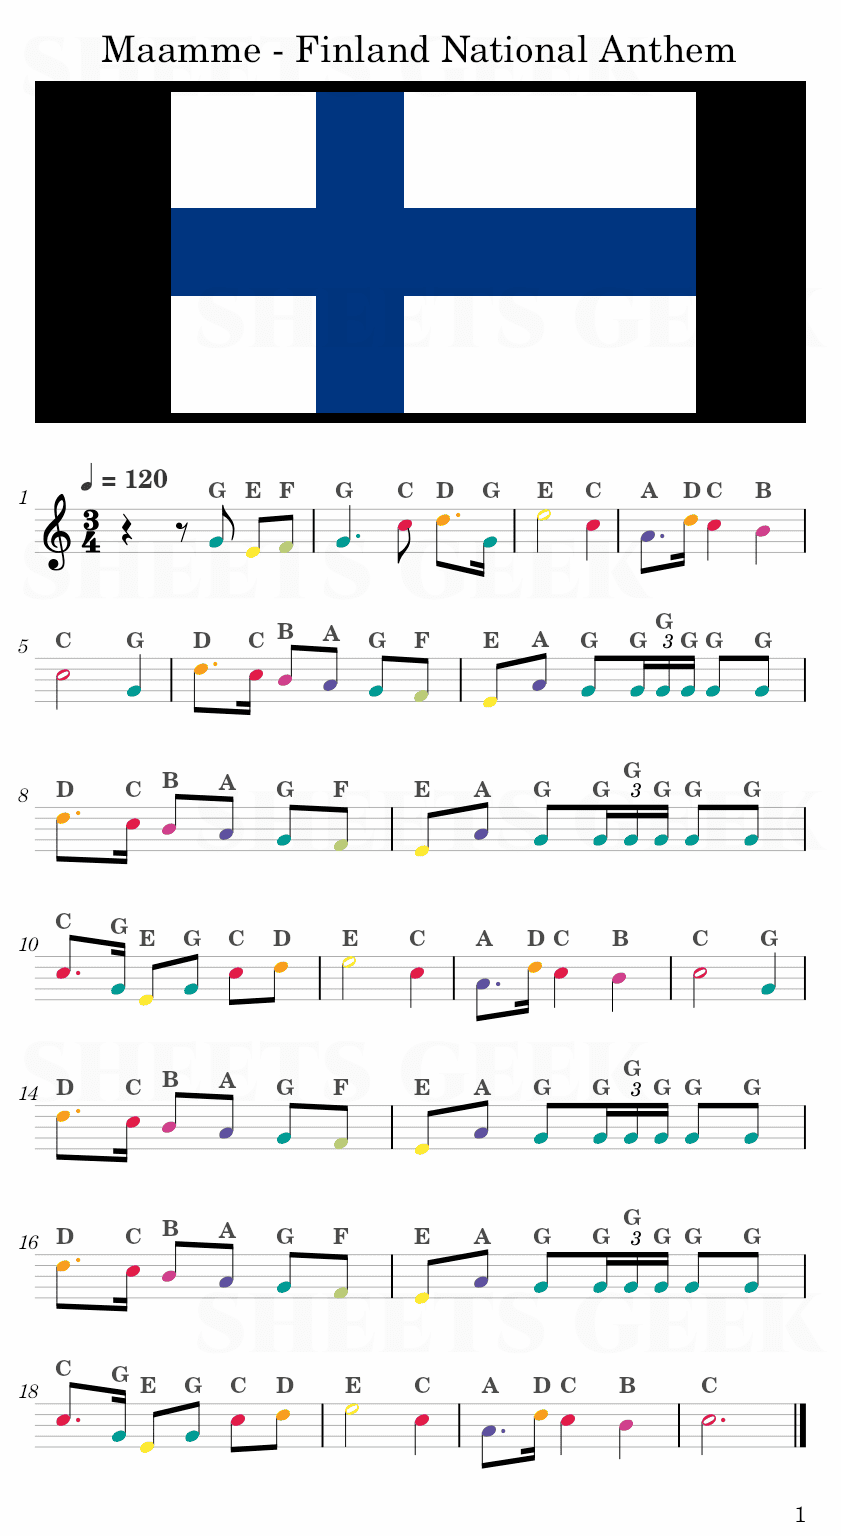 Maamme - Finland National Anthem Easy Sheet Music Free for piano, keyboard, flute, violin, sax, cello page 1